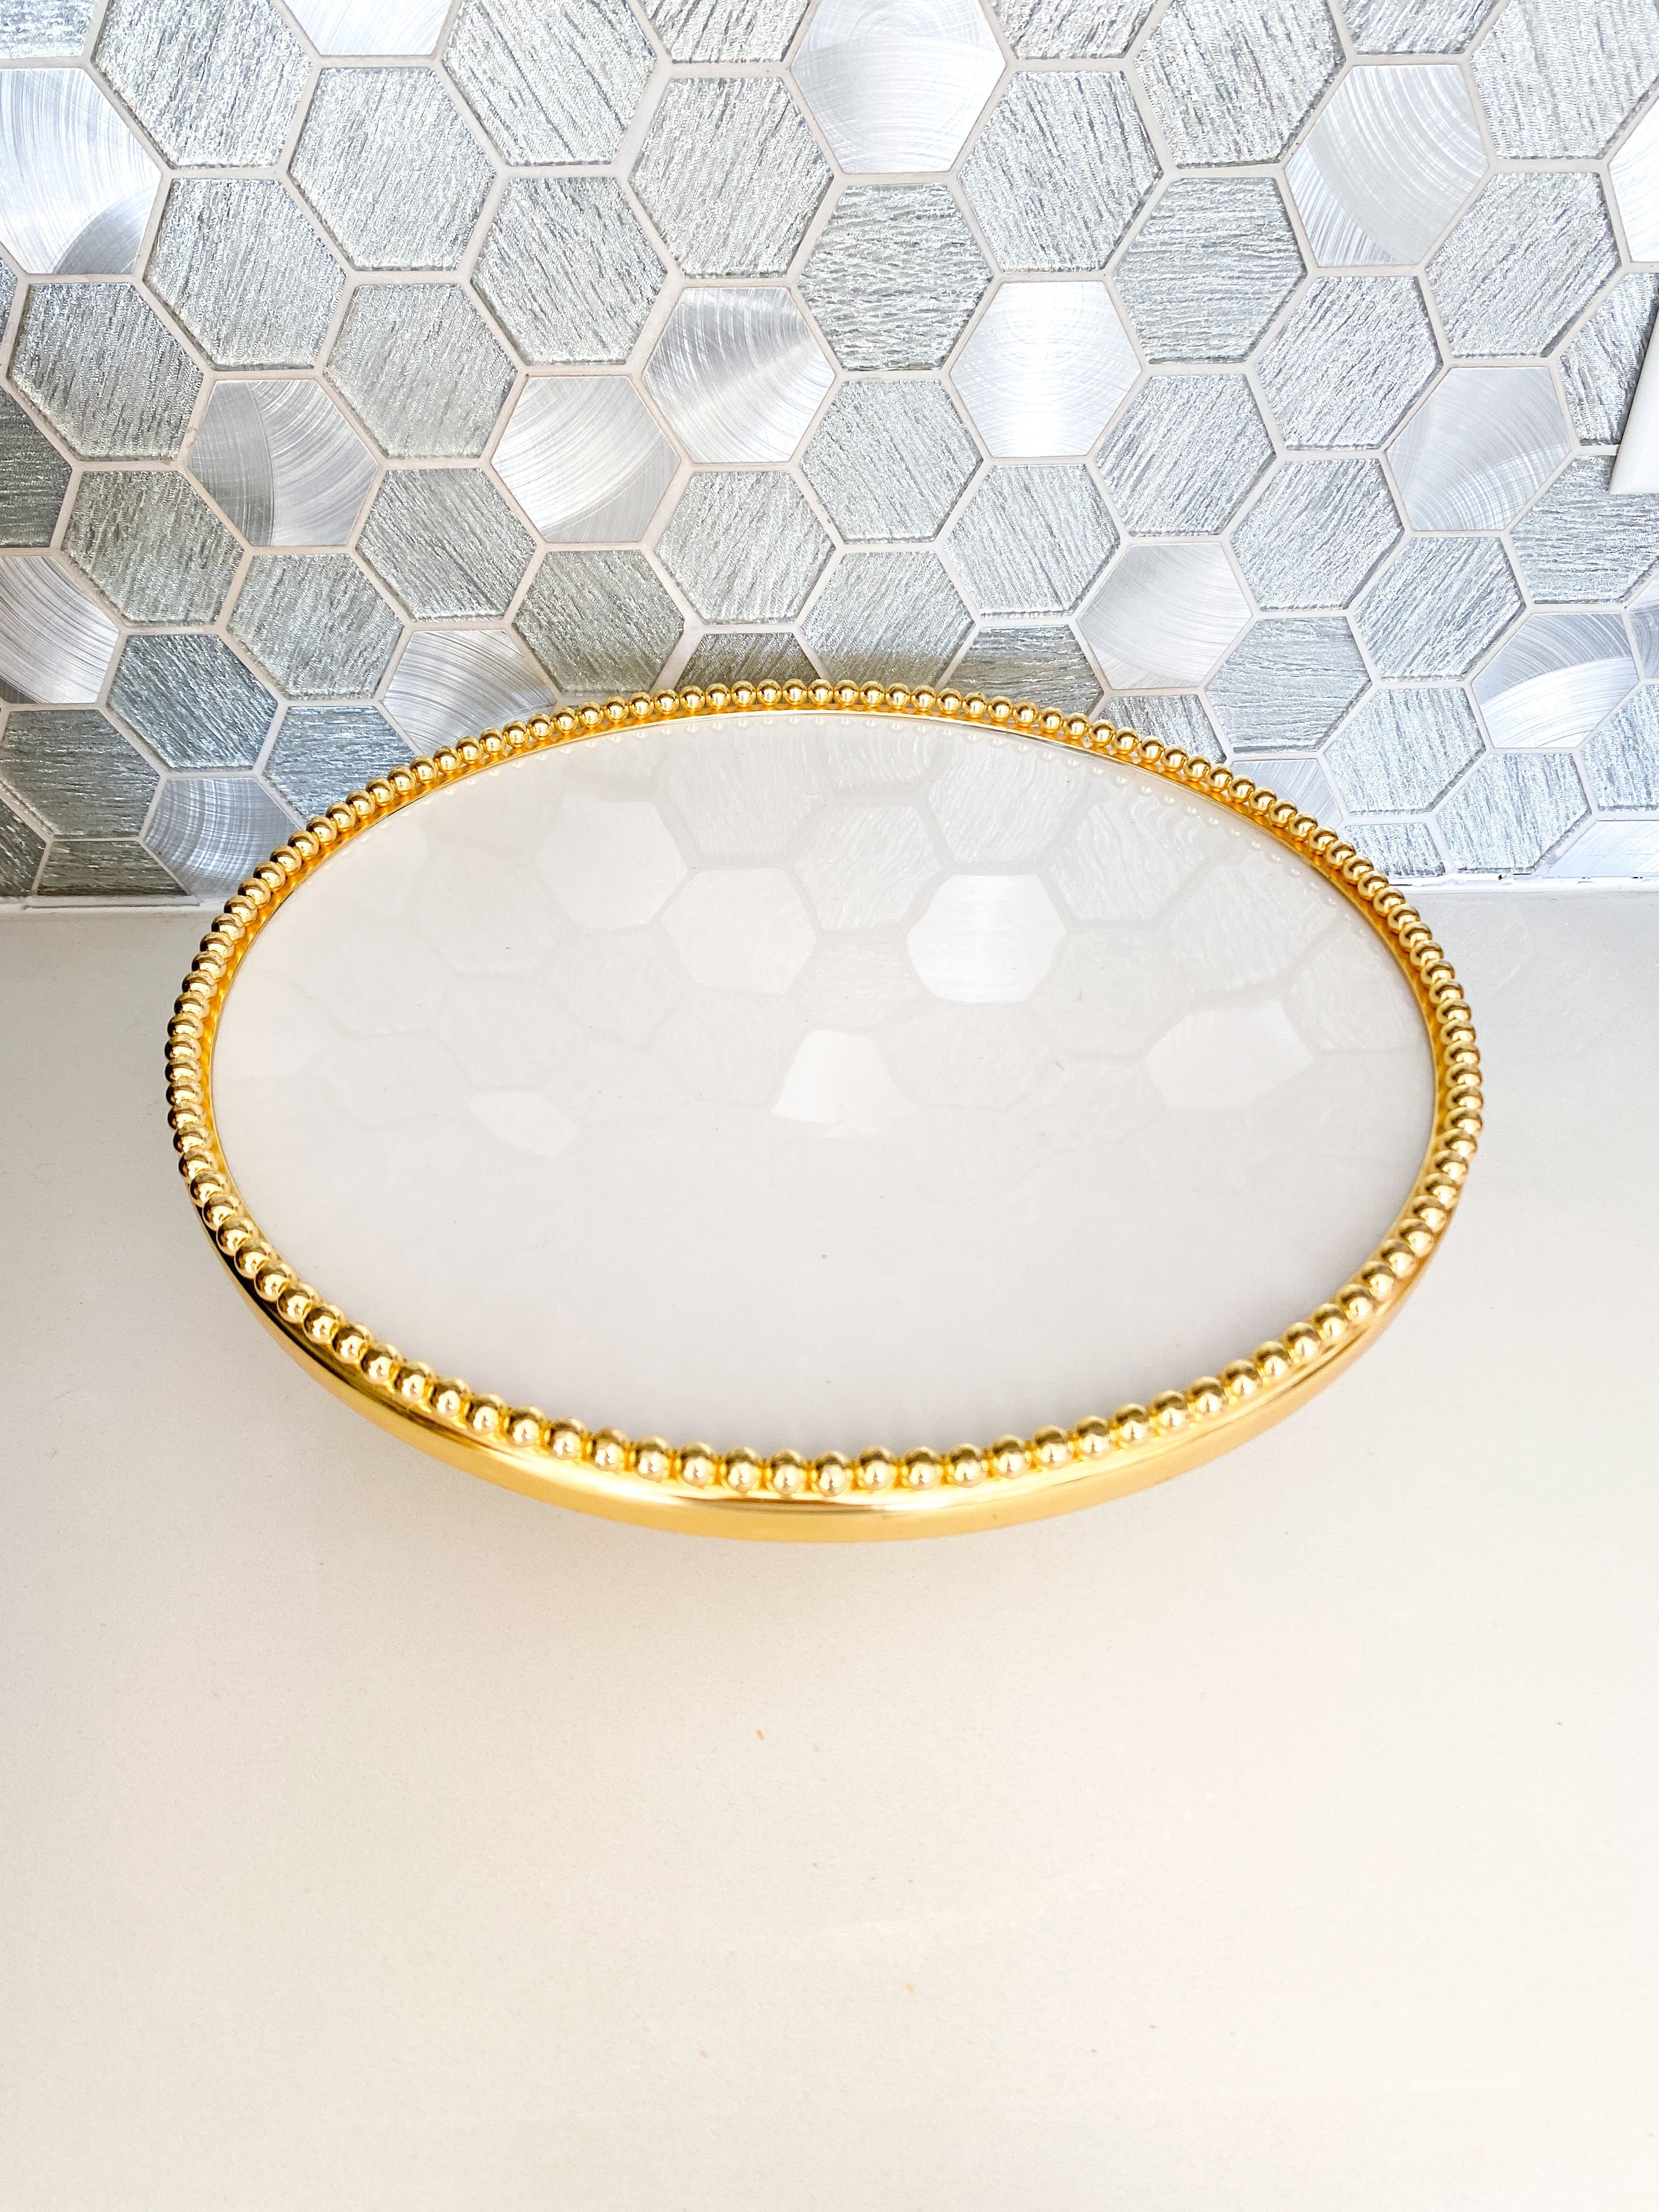 Gold Beaded Cake Stand - HTS HOME DECOR